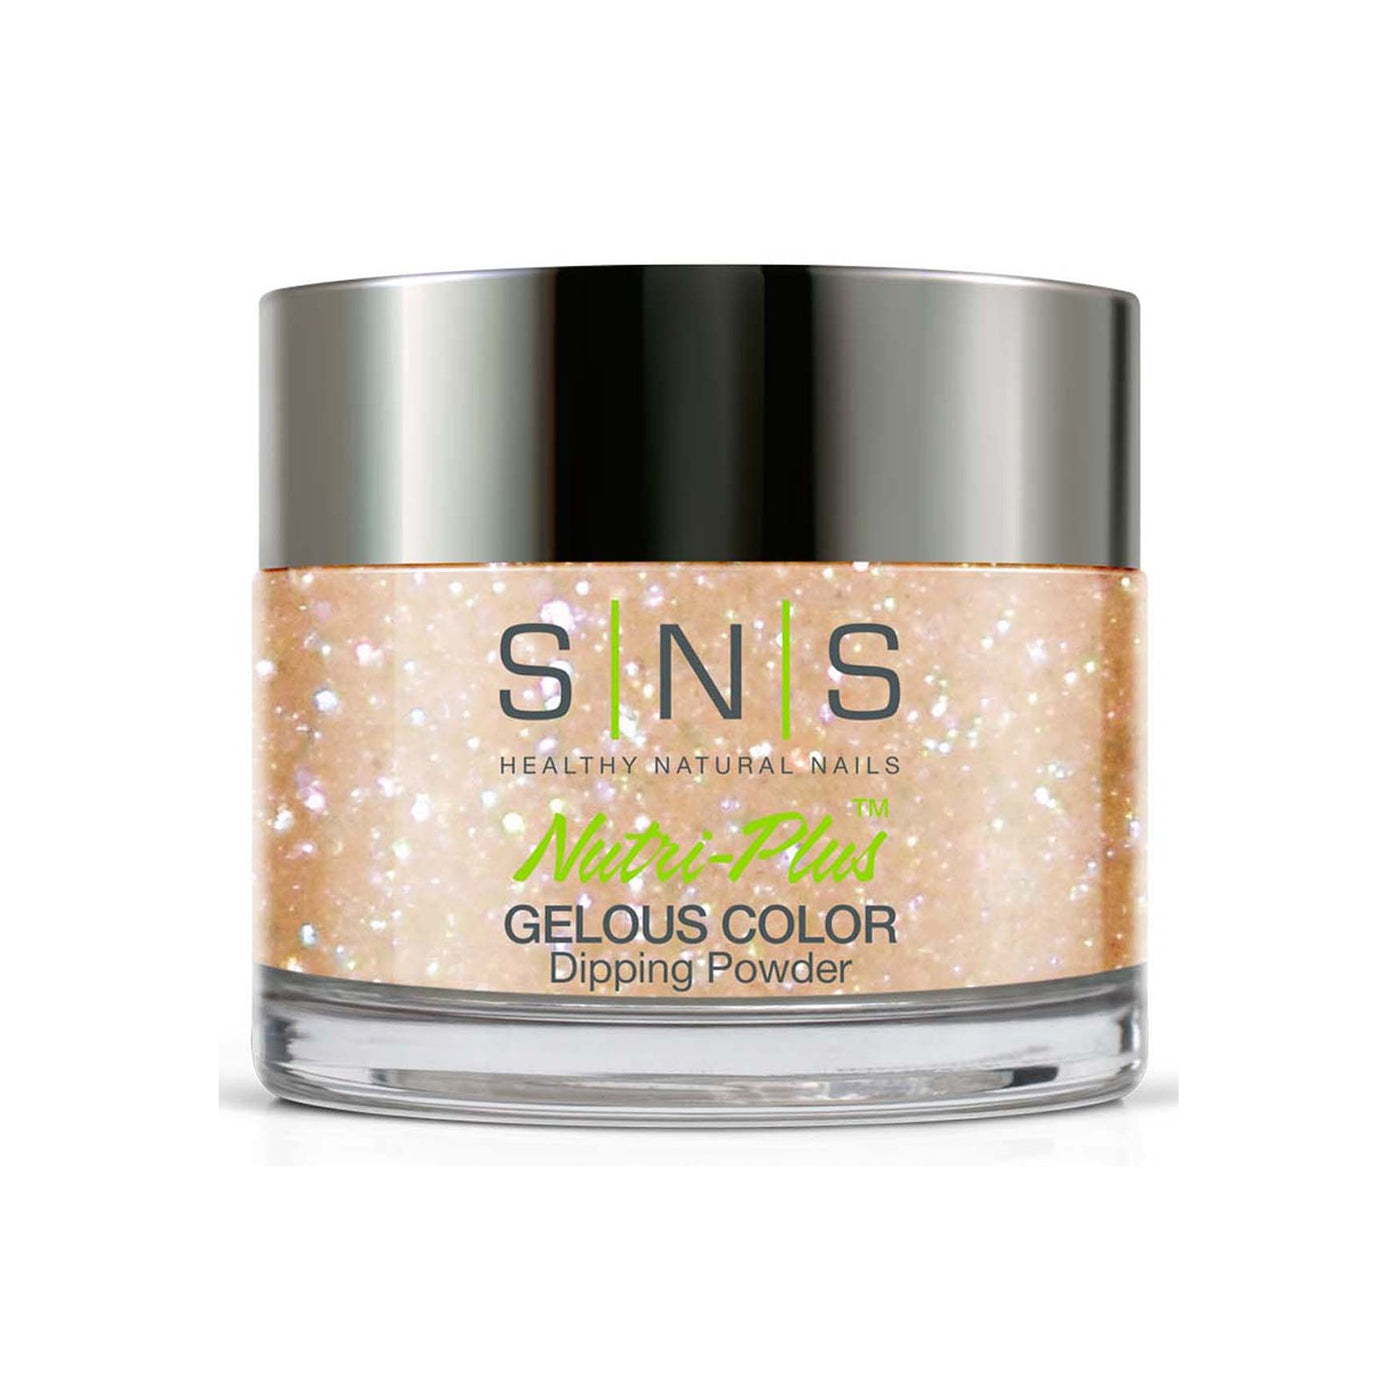 SNS Gelous Color Dipping Powder BD15 Mohair Sweater (43g) packaging